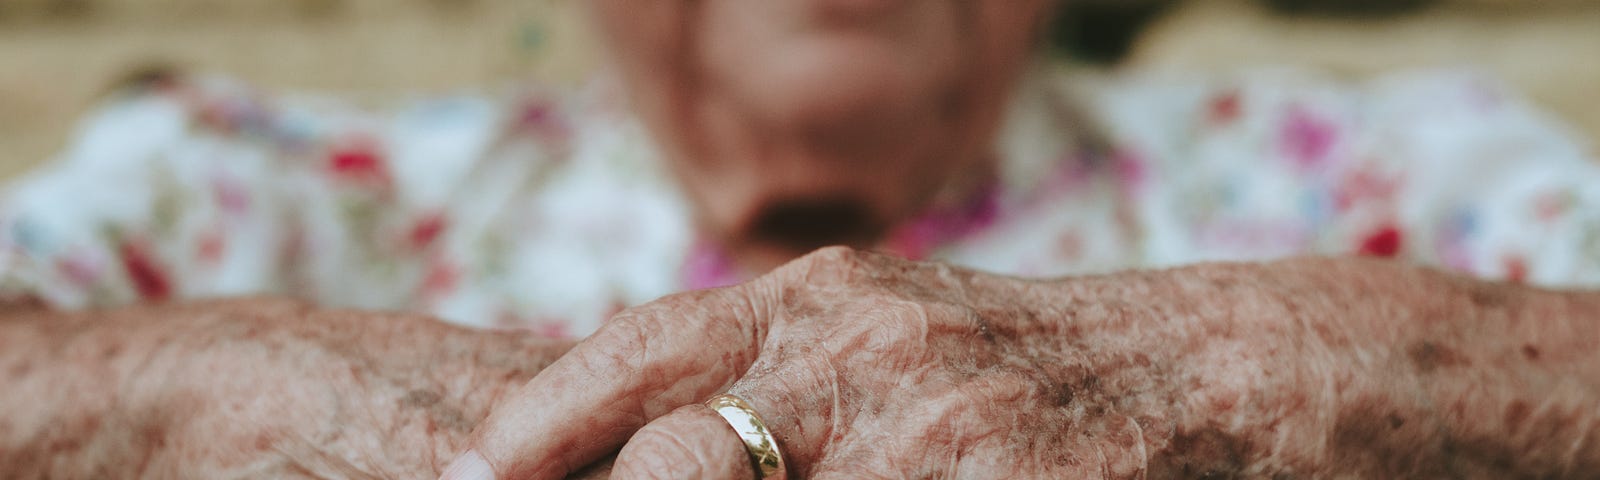 A close up of very aged hands, clasped in front of an elderly woman wearing a white and pink floral blouse.